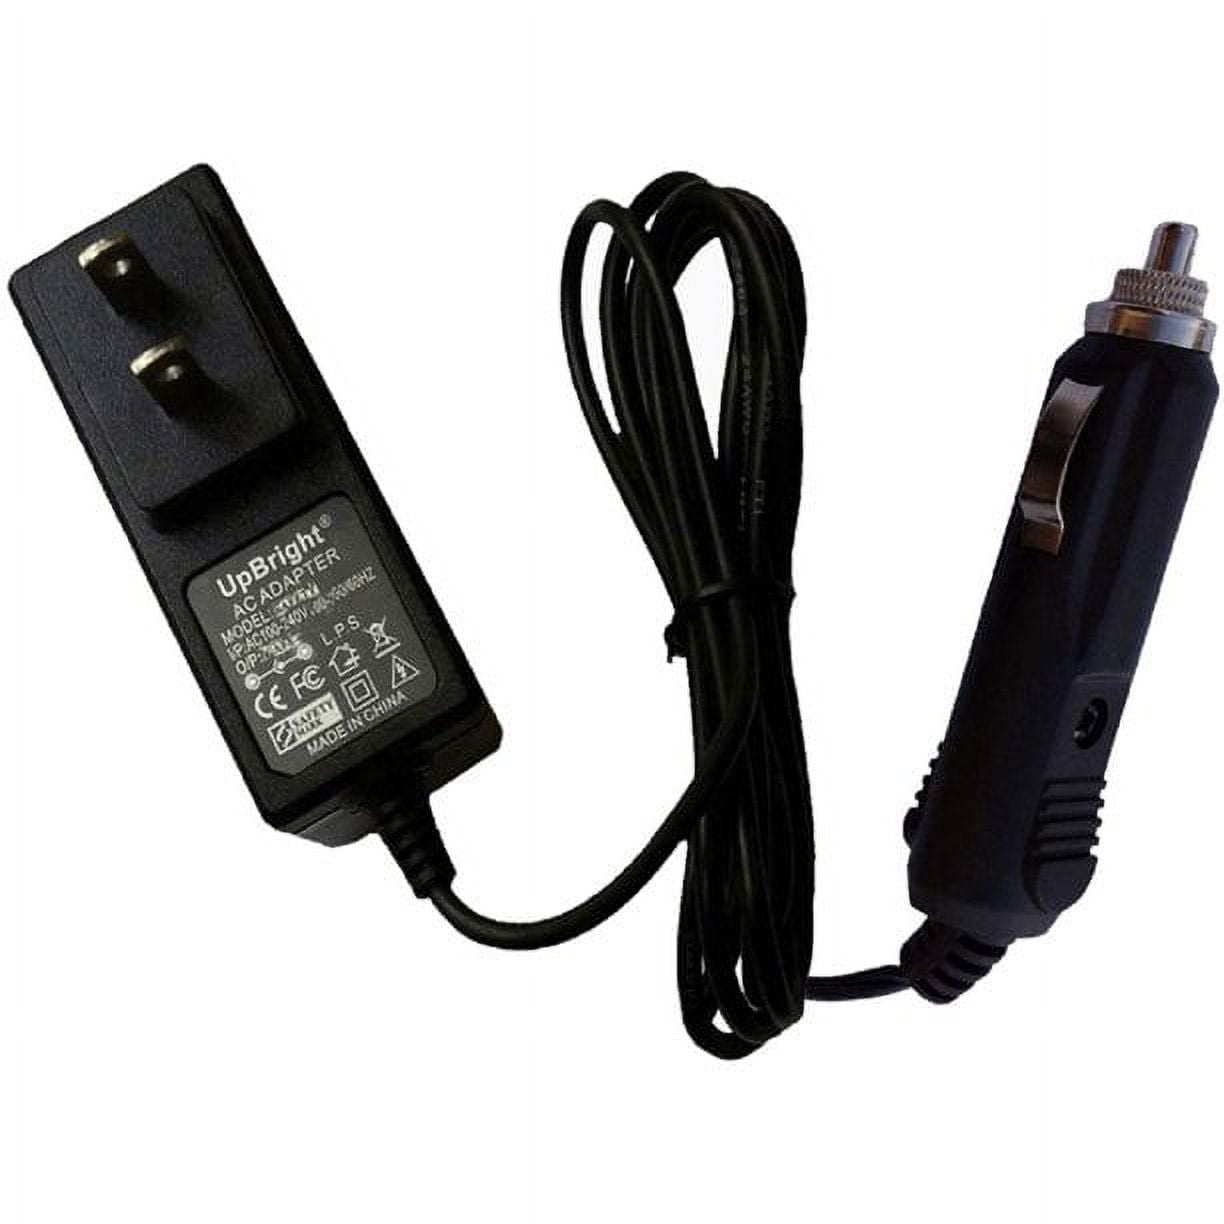 12V AC to AC Adapter for Model: # U471AE Input: 120VAC/60Hz, Output 12VAC  700mA - 1000mA Class 2 Transformer Power Supply Cord Cable PS Wall Home